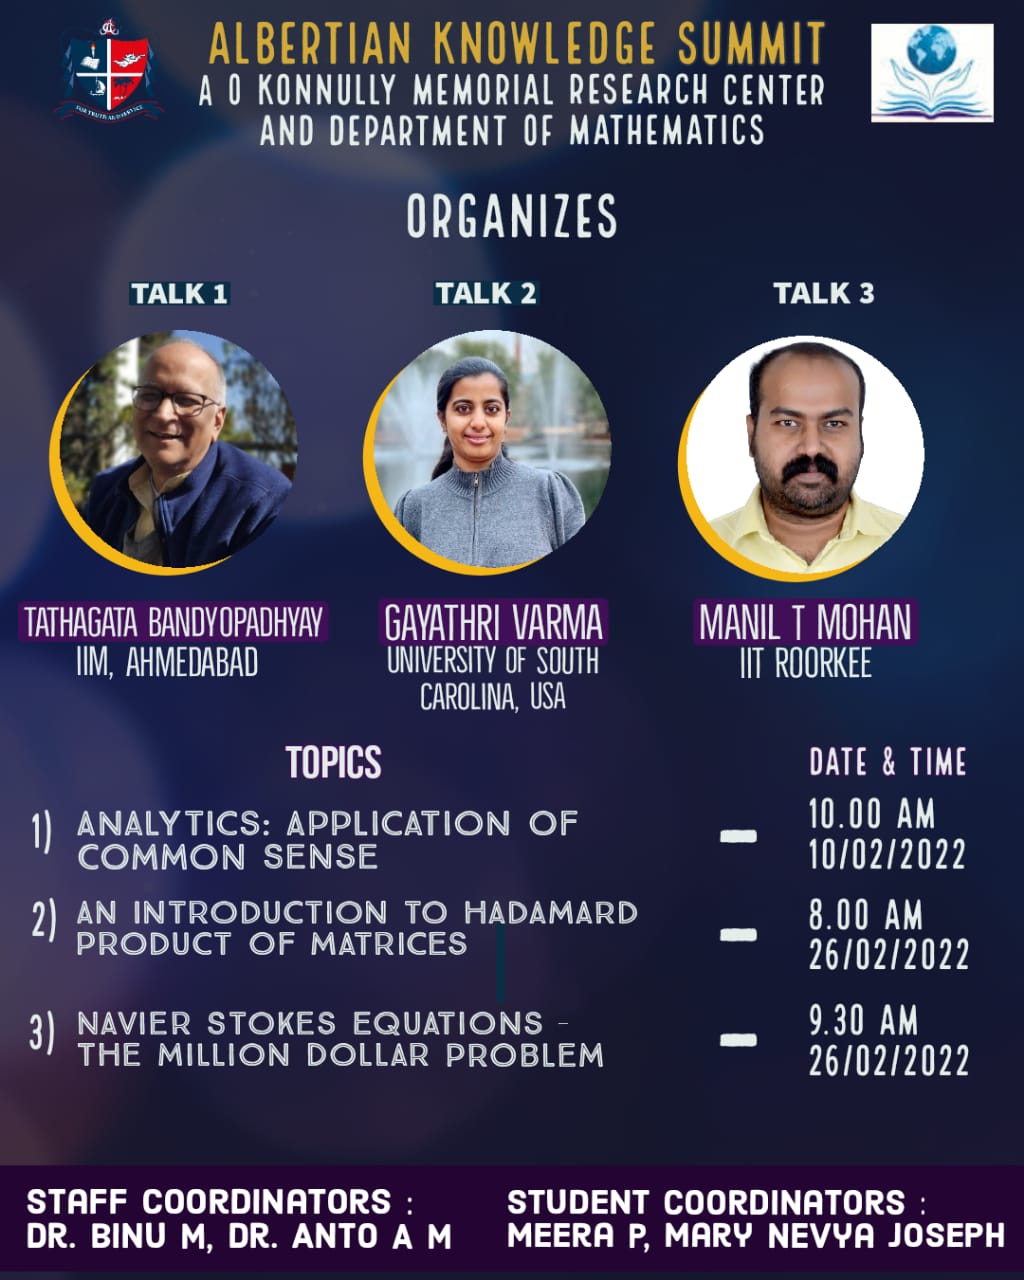 AKS 2022- Analytics : Application of Common Sense, An Introduction to Hadamard Product of Matrices, Navier Stokes Equations – The Million Dollar Problem